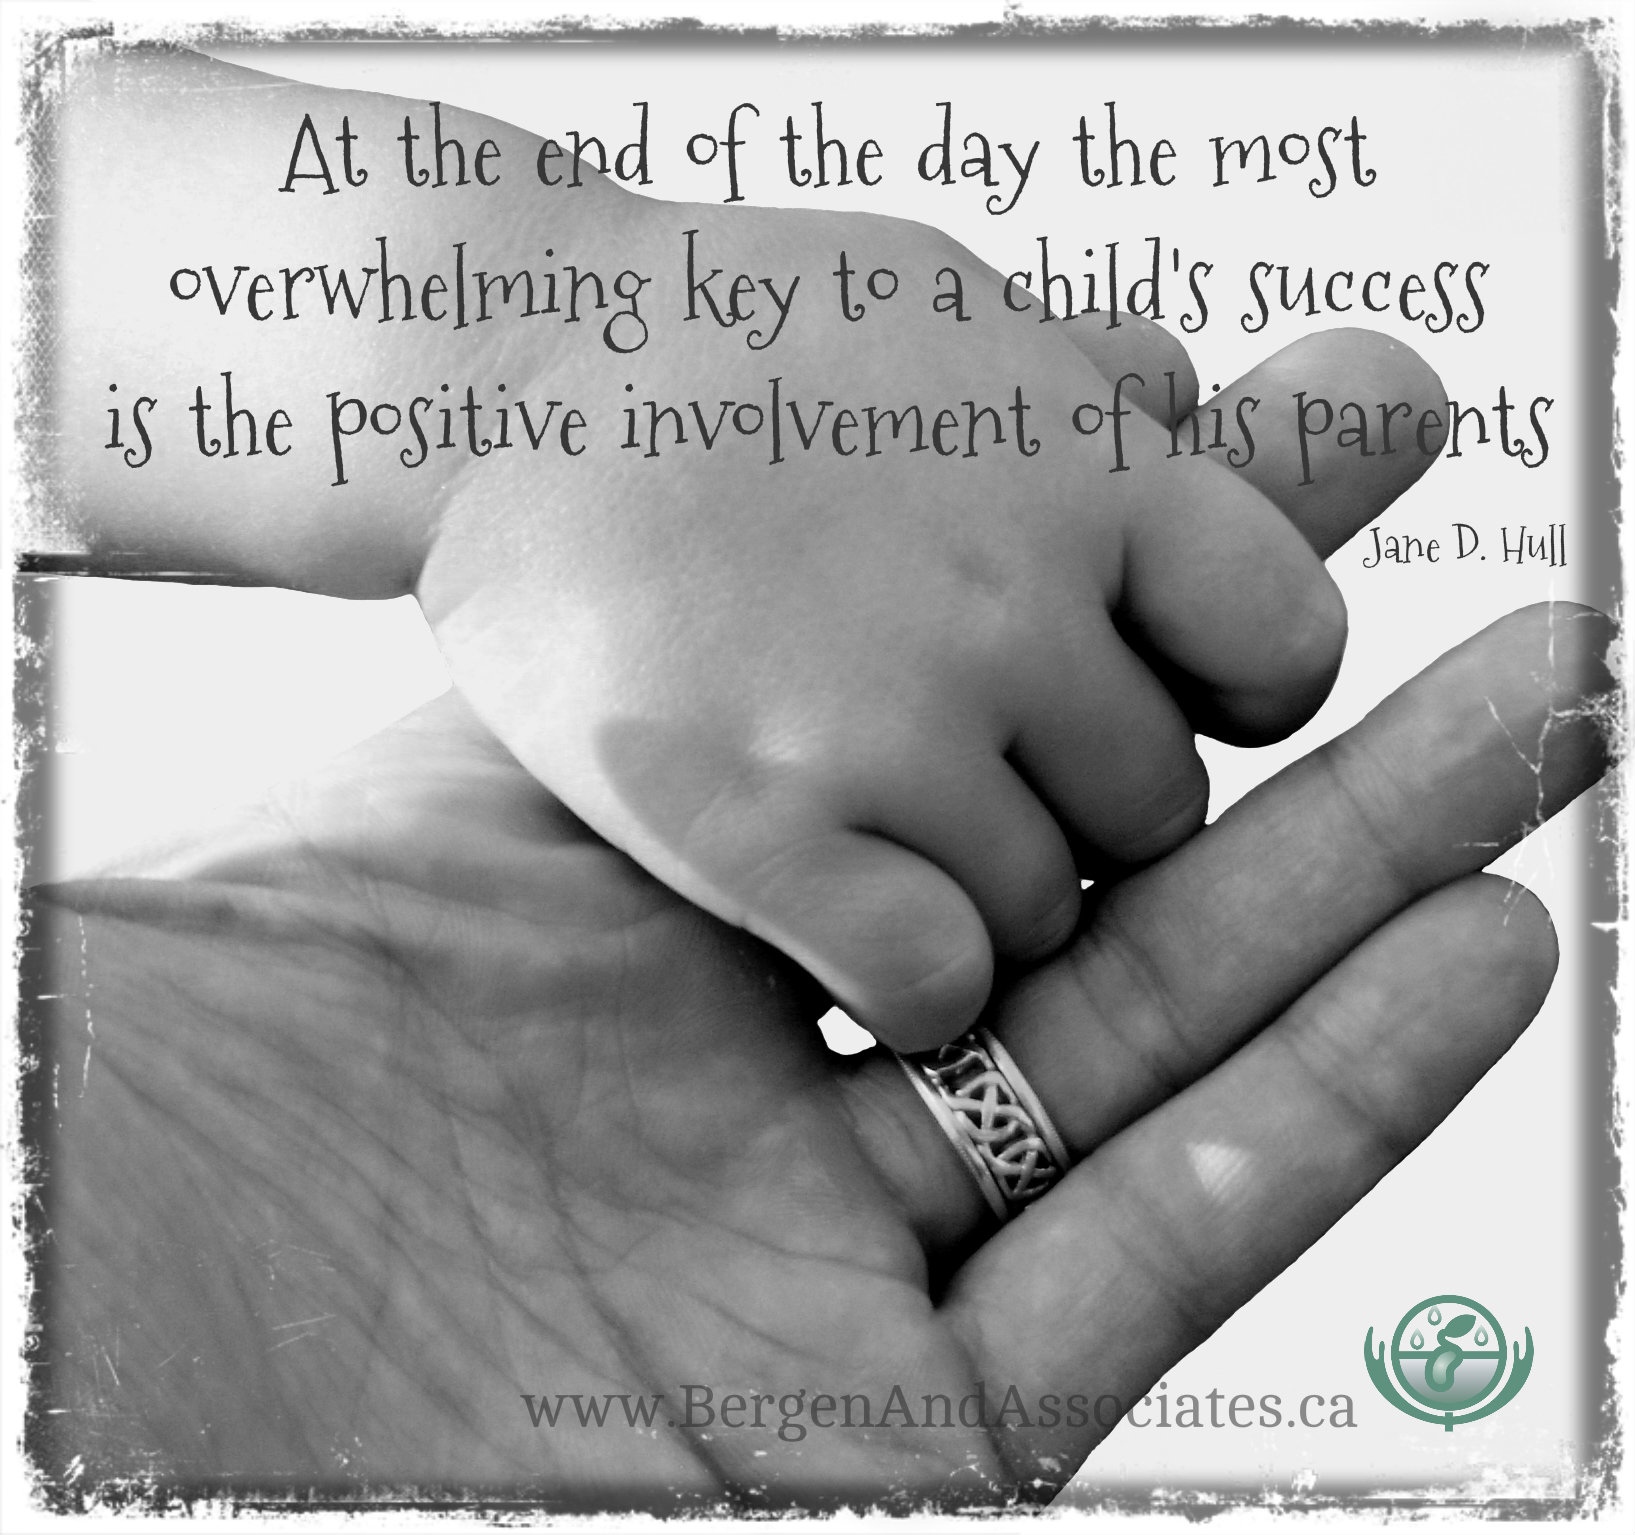 AT the end of the day, the most overwhelming key to a child